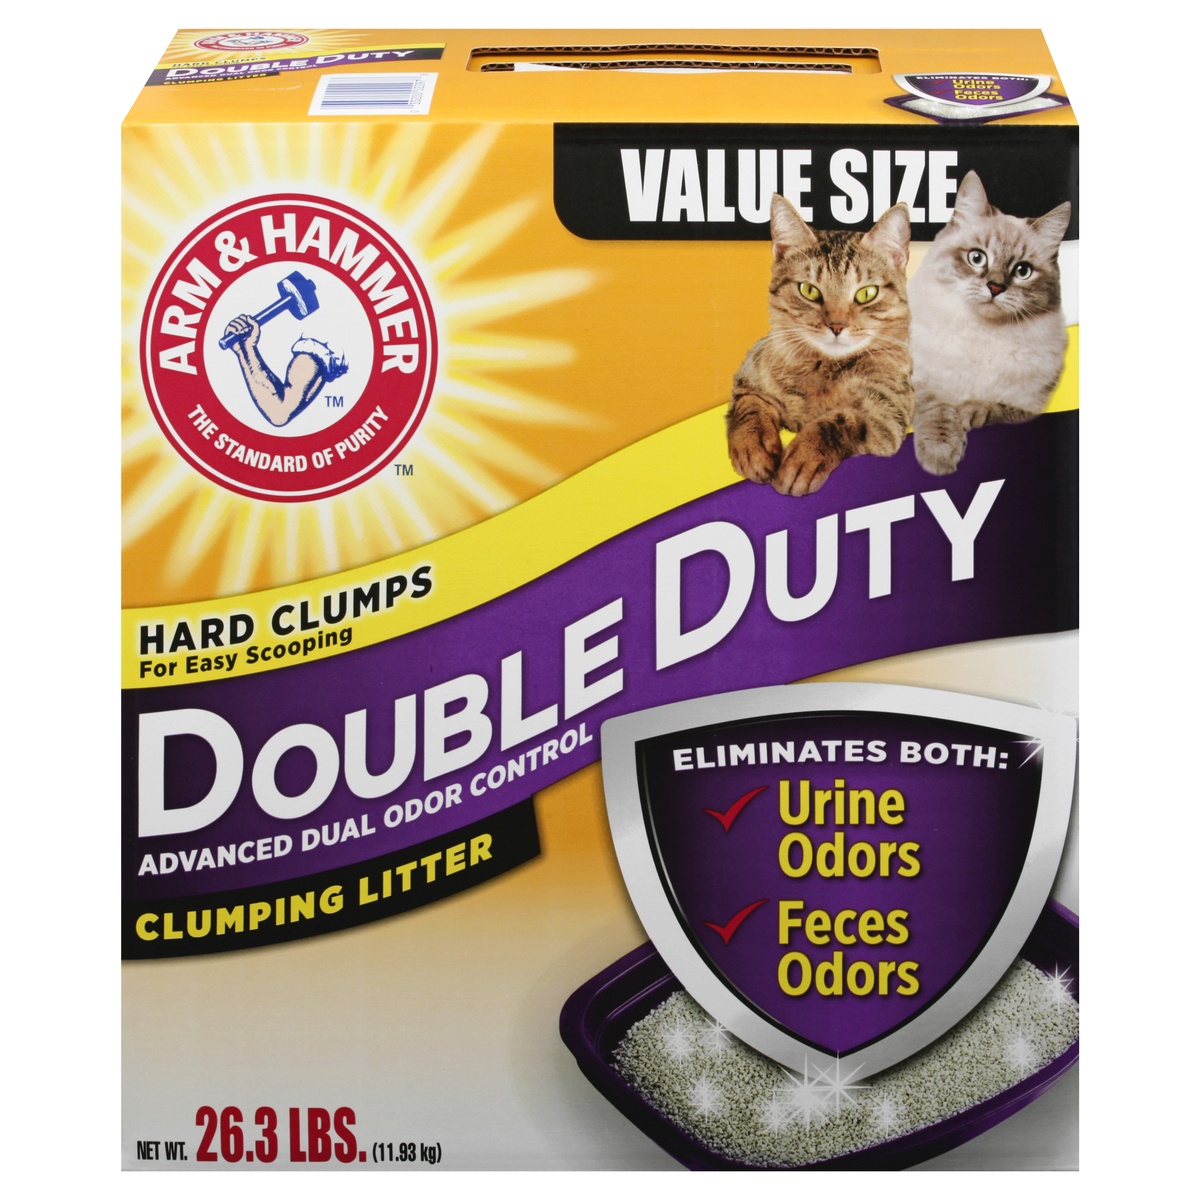 slide 9 of 9, ARM & HAMMER Double Duty Advanced Odor Control Clumping Cat Litter, 26.3 lb